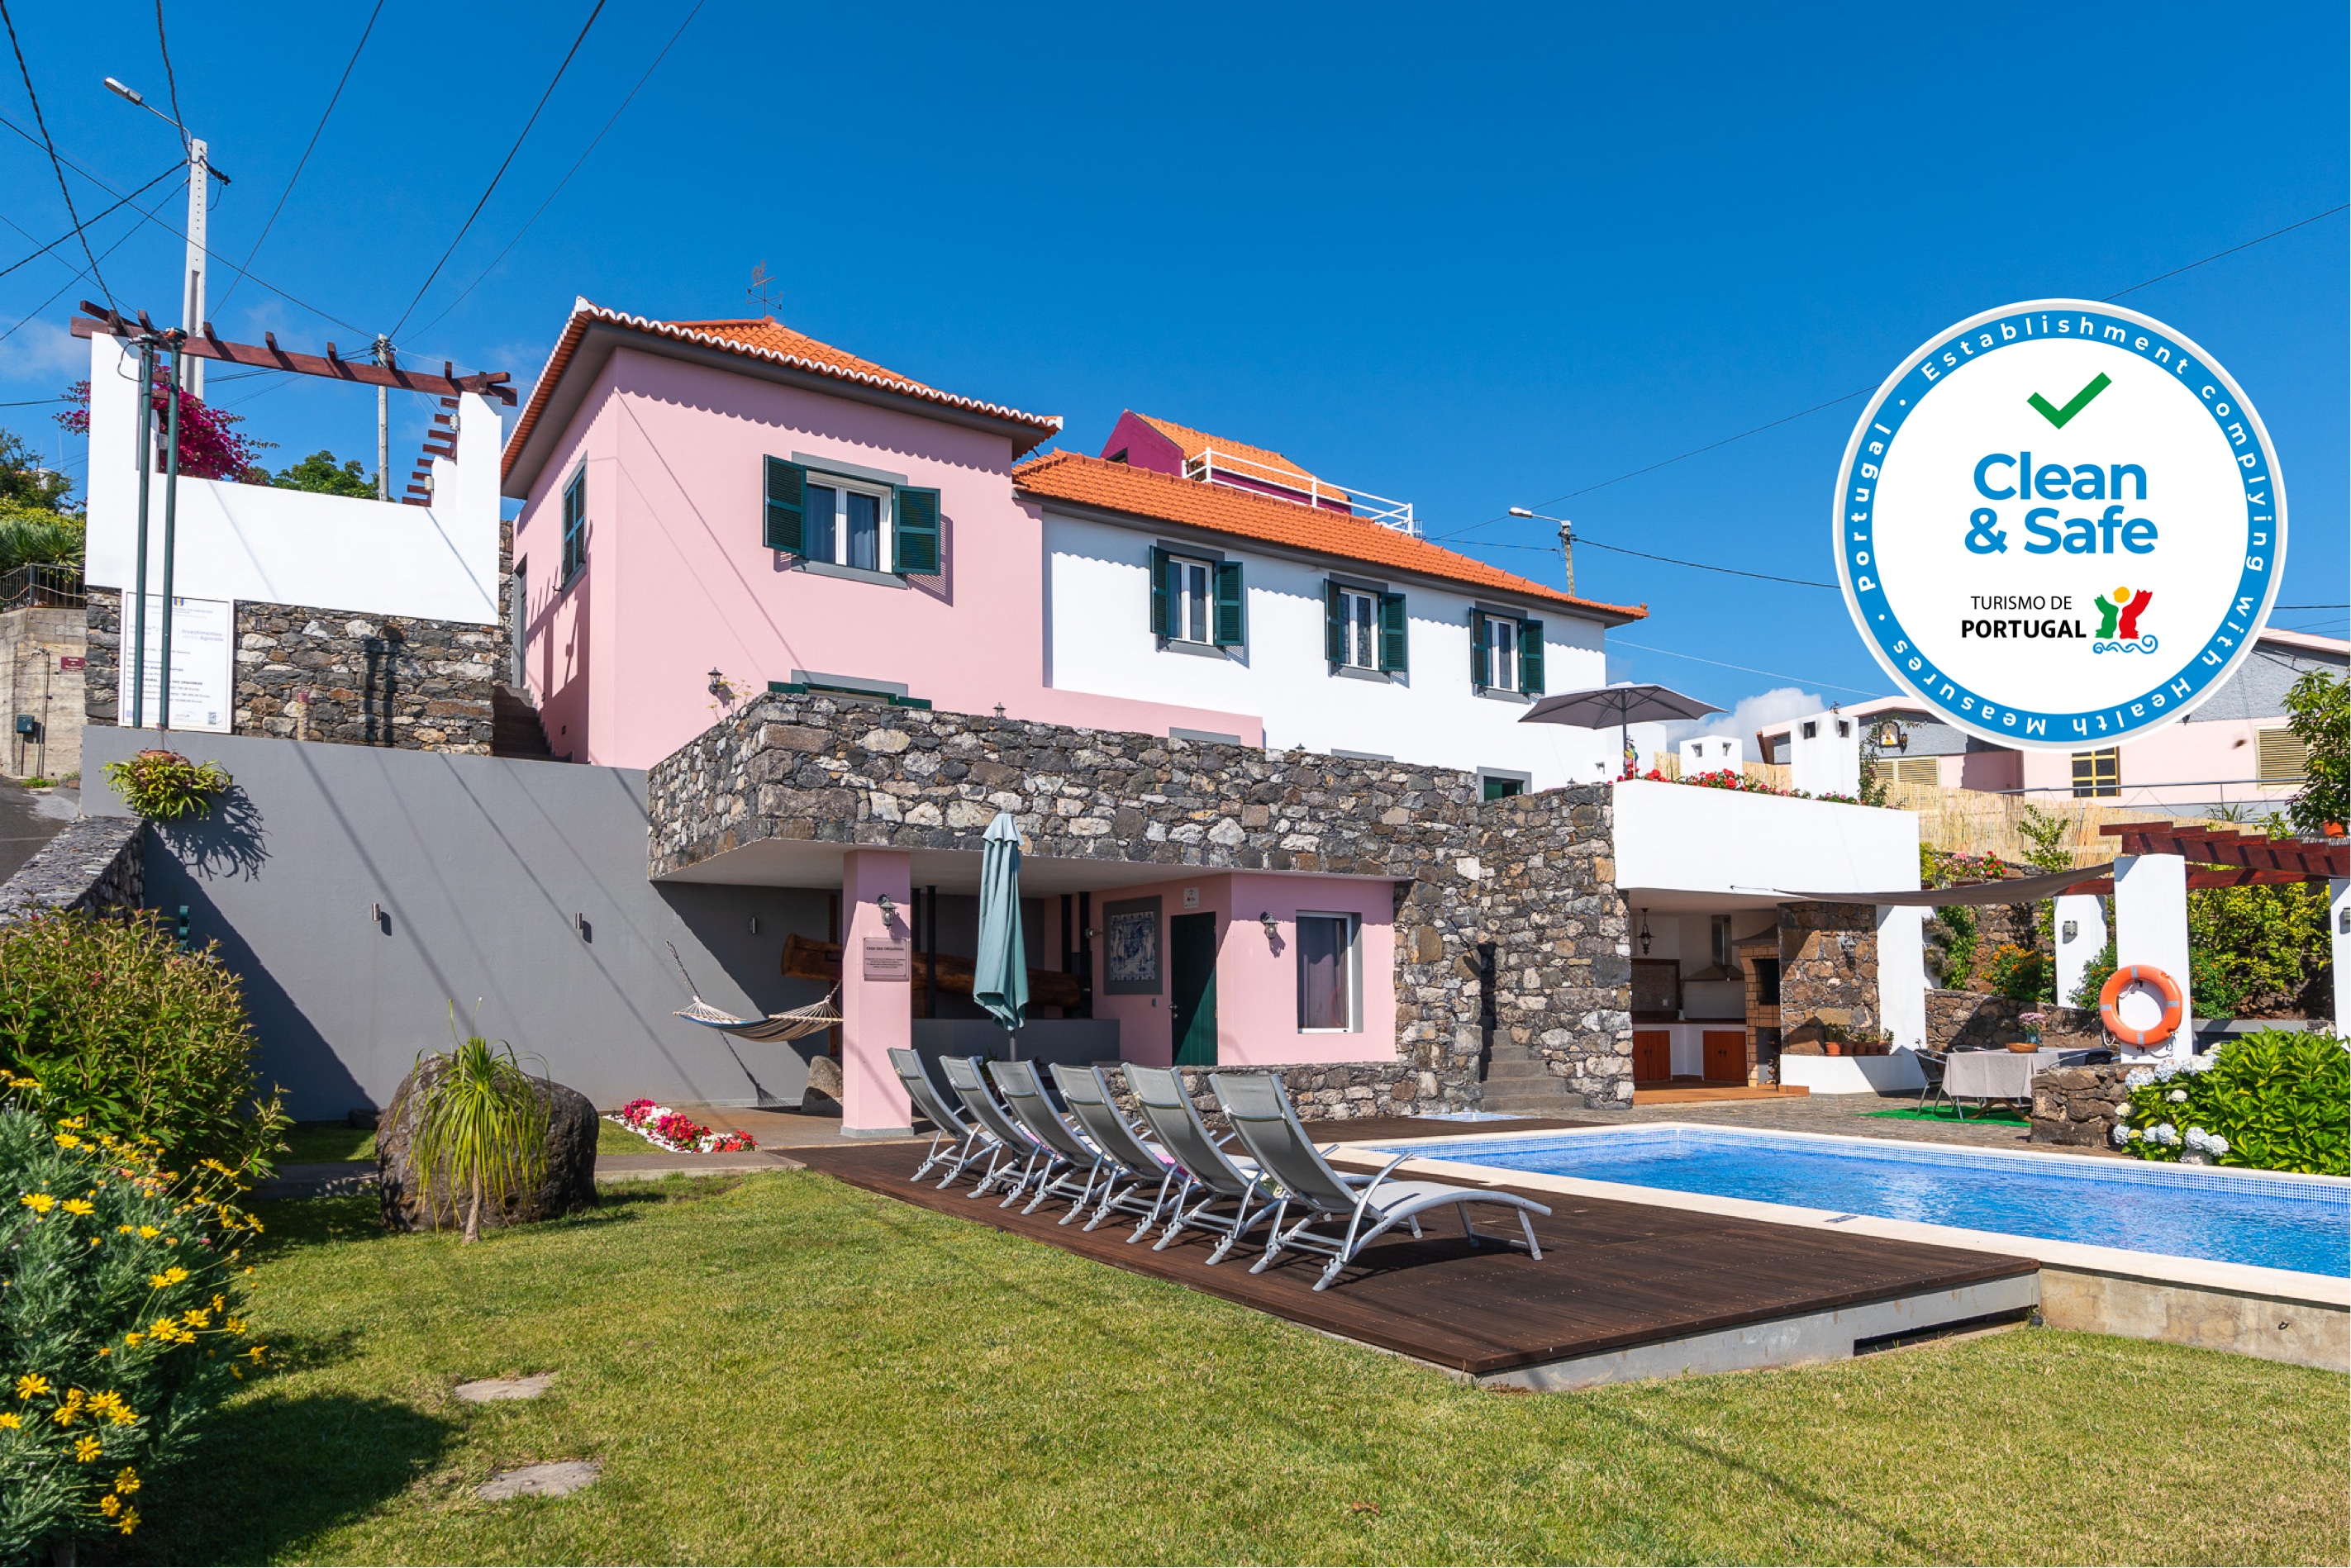 CASA ARCO OLD - 5 minutes from the Serra and the Sea (center of